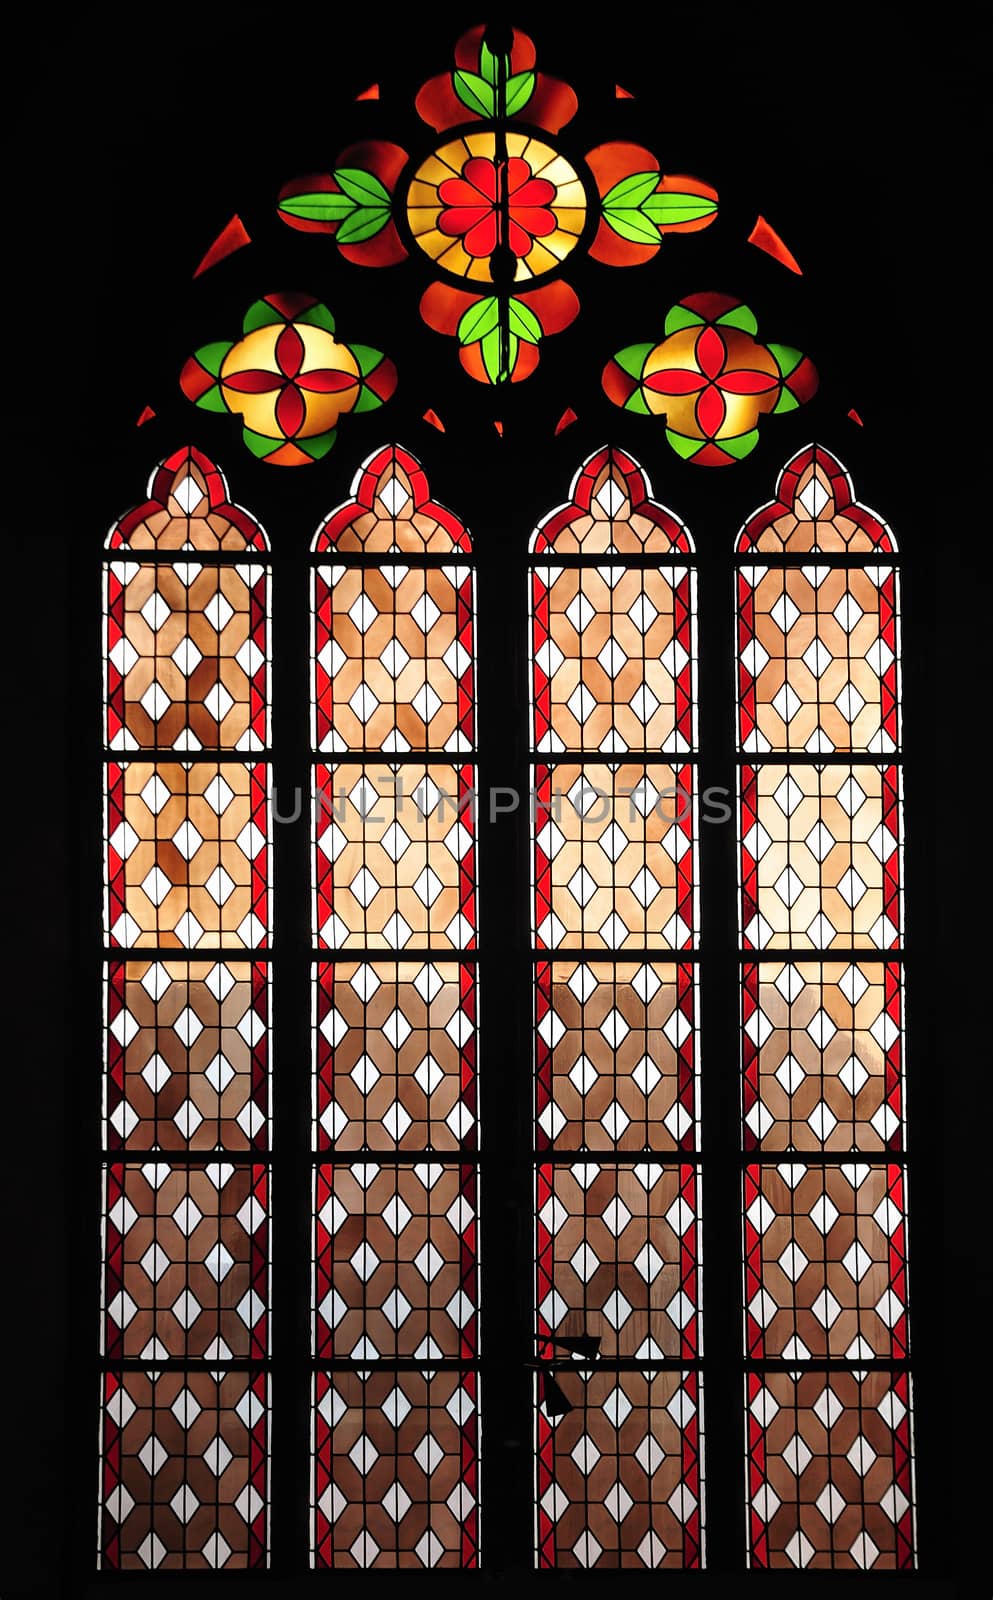 Stained glass window by a40757